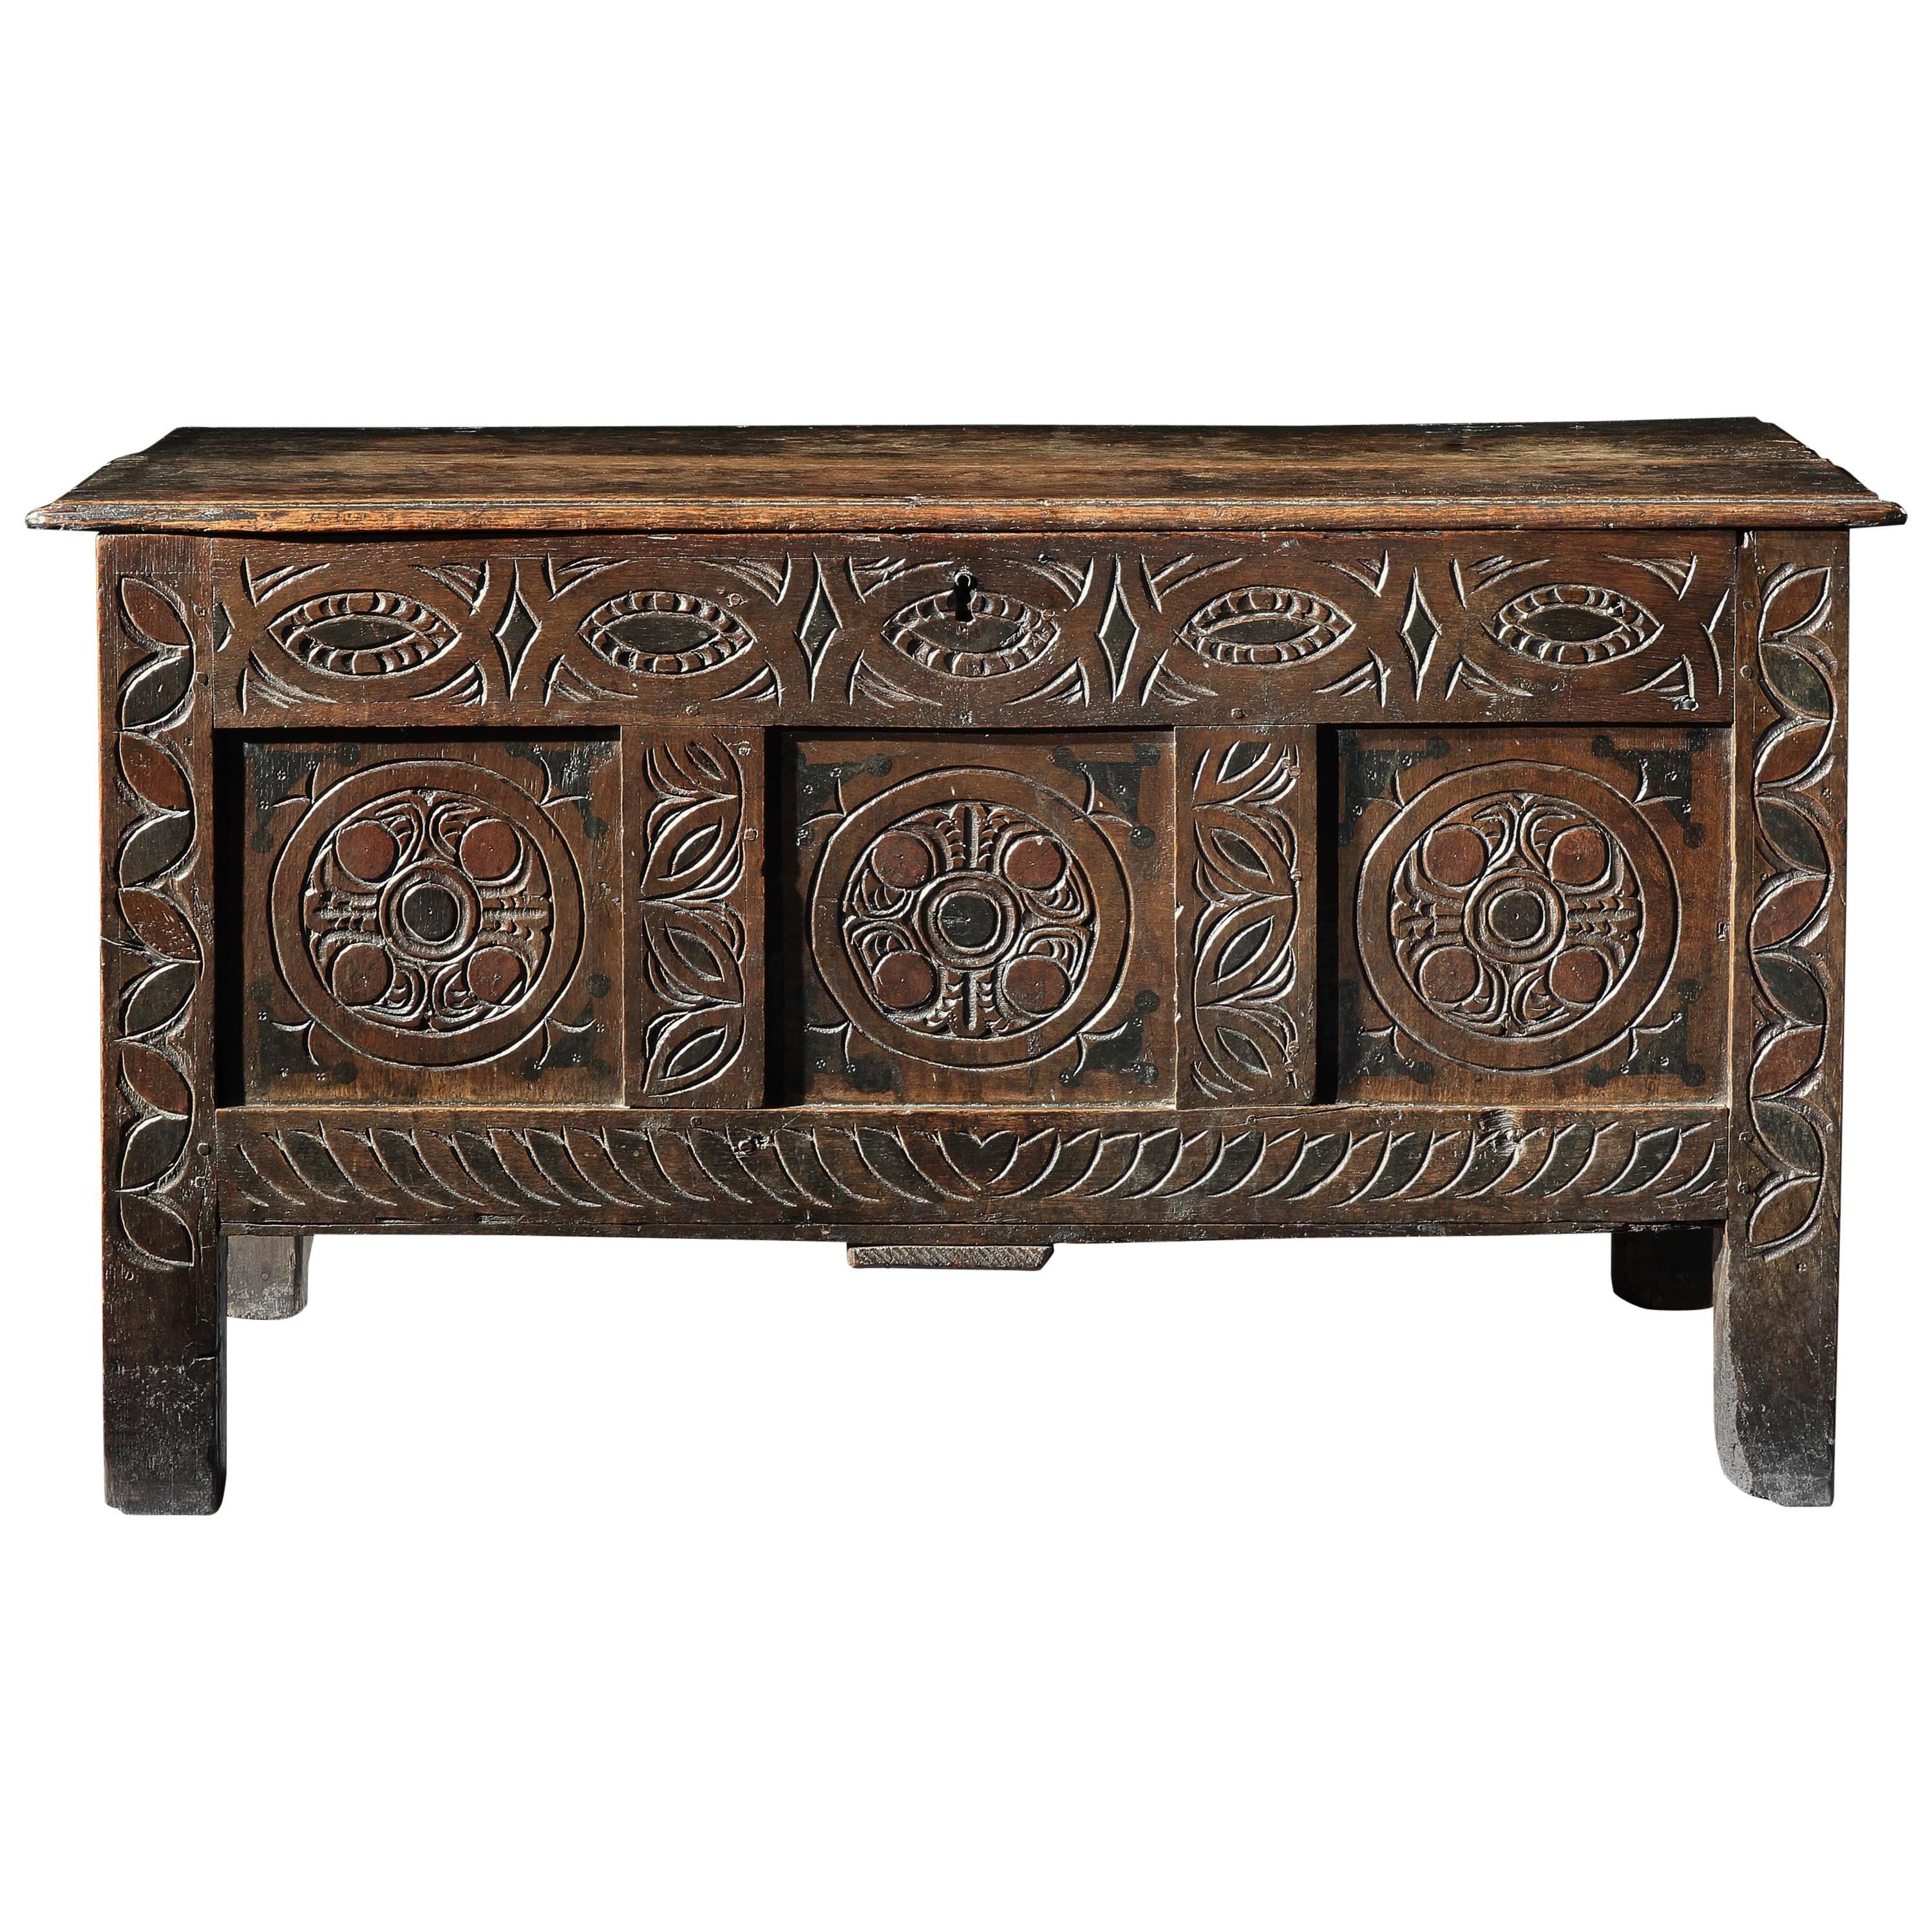 Early West Country Three-Panel Decorated Chest For Sale